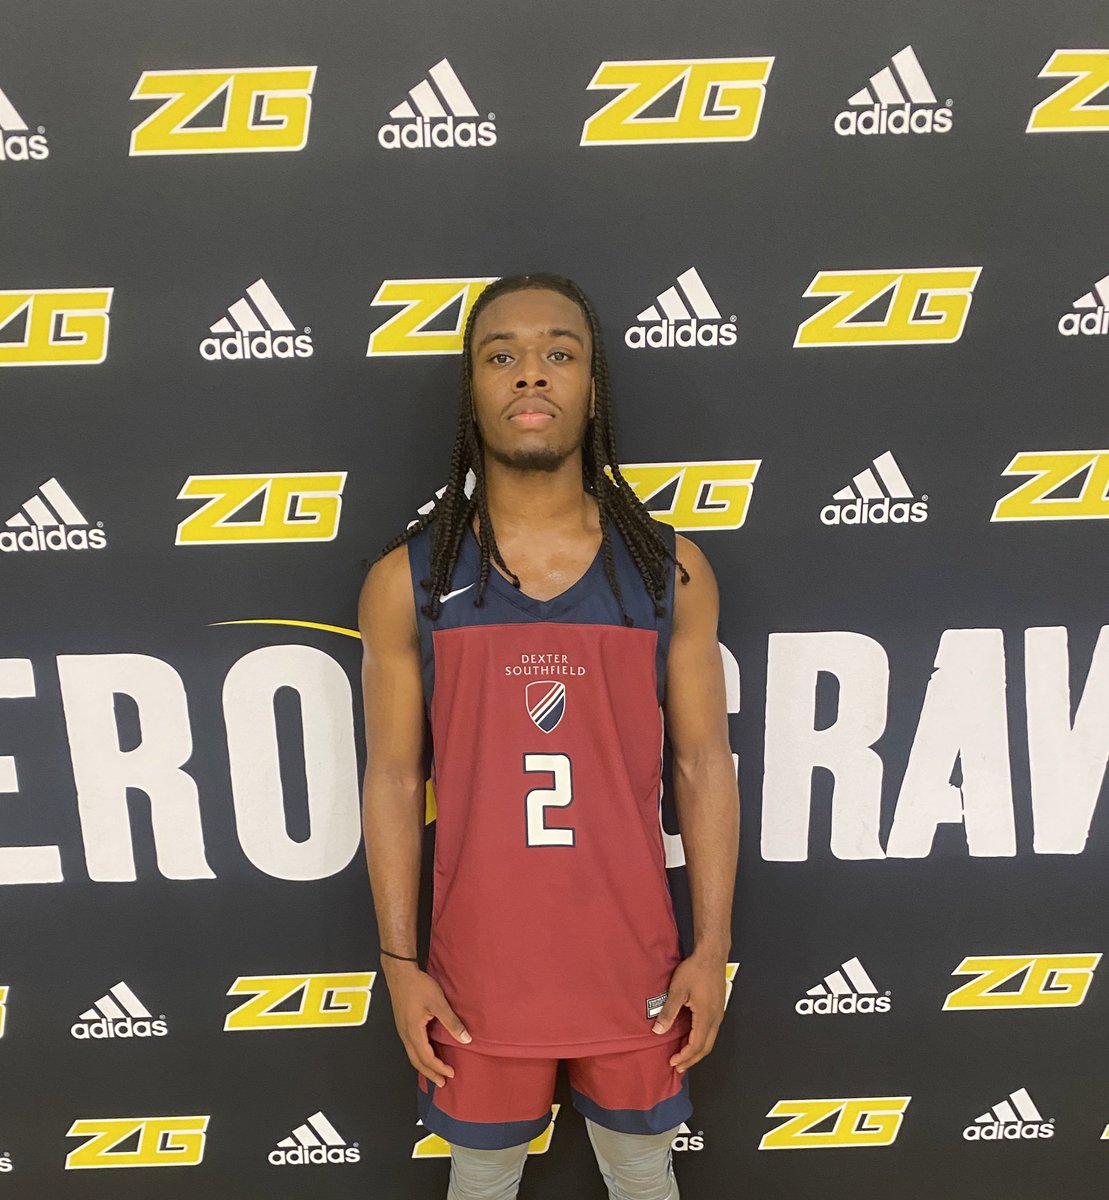 Ta’Quan Williams of Dexter Southfield (MA) put on a show finishing with 25 points 10 assists and 4 rebounds to get the #ZGPOTG #ZGPC @DXSF_Athletics